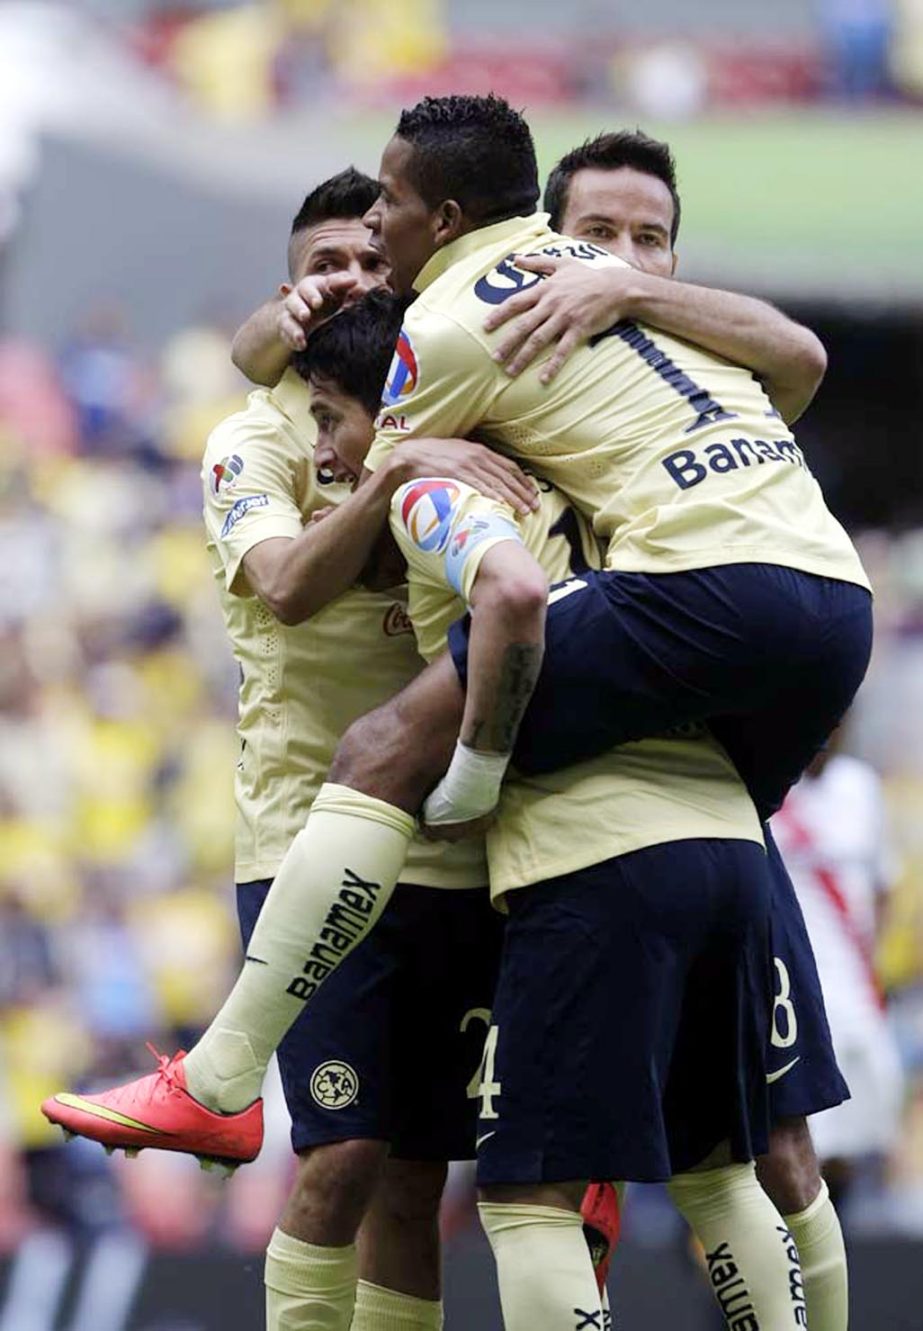 America's Rubens Sambueza (center) celebrates with his teammates after scoring against Morelia during a Mexican soccer league match in Mexico City on Saturday.